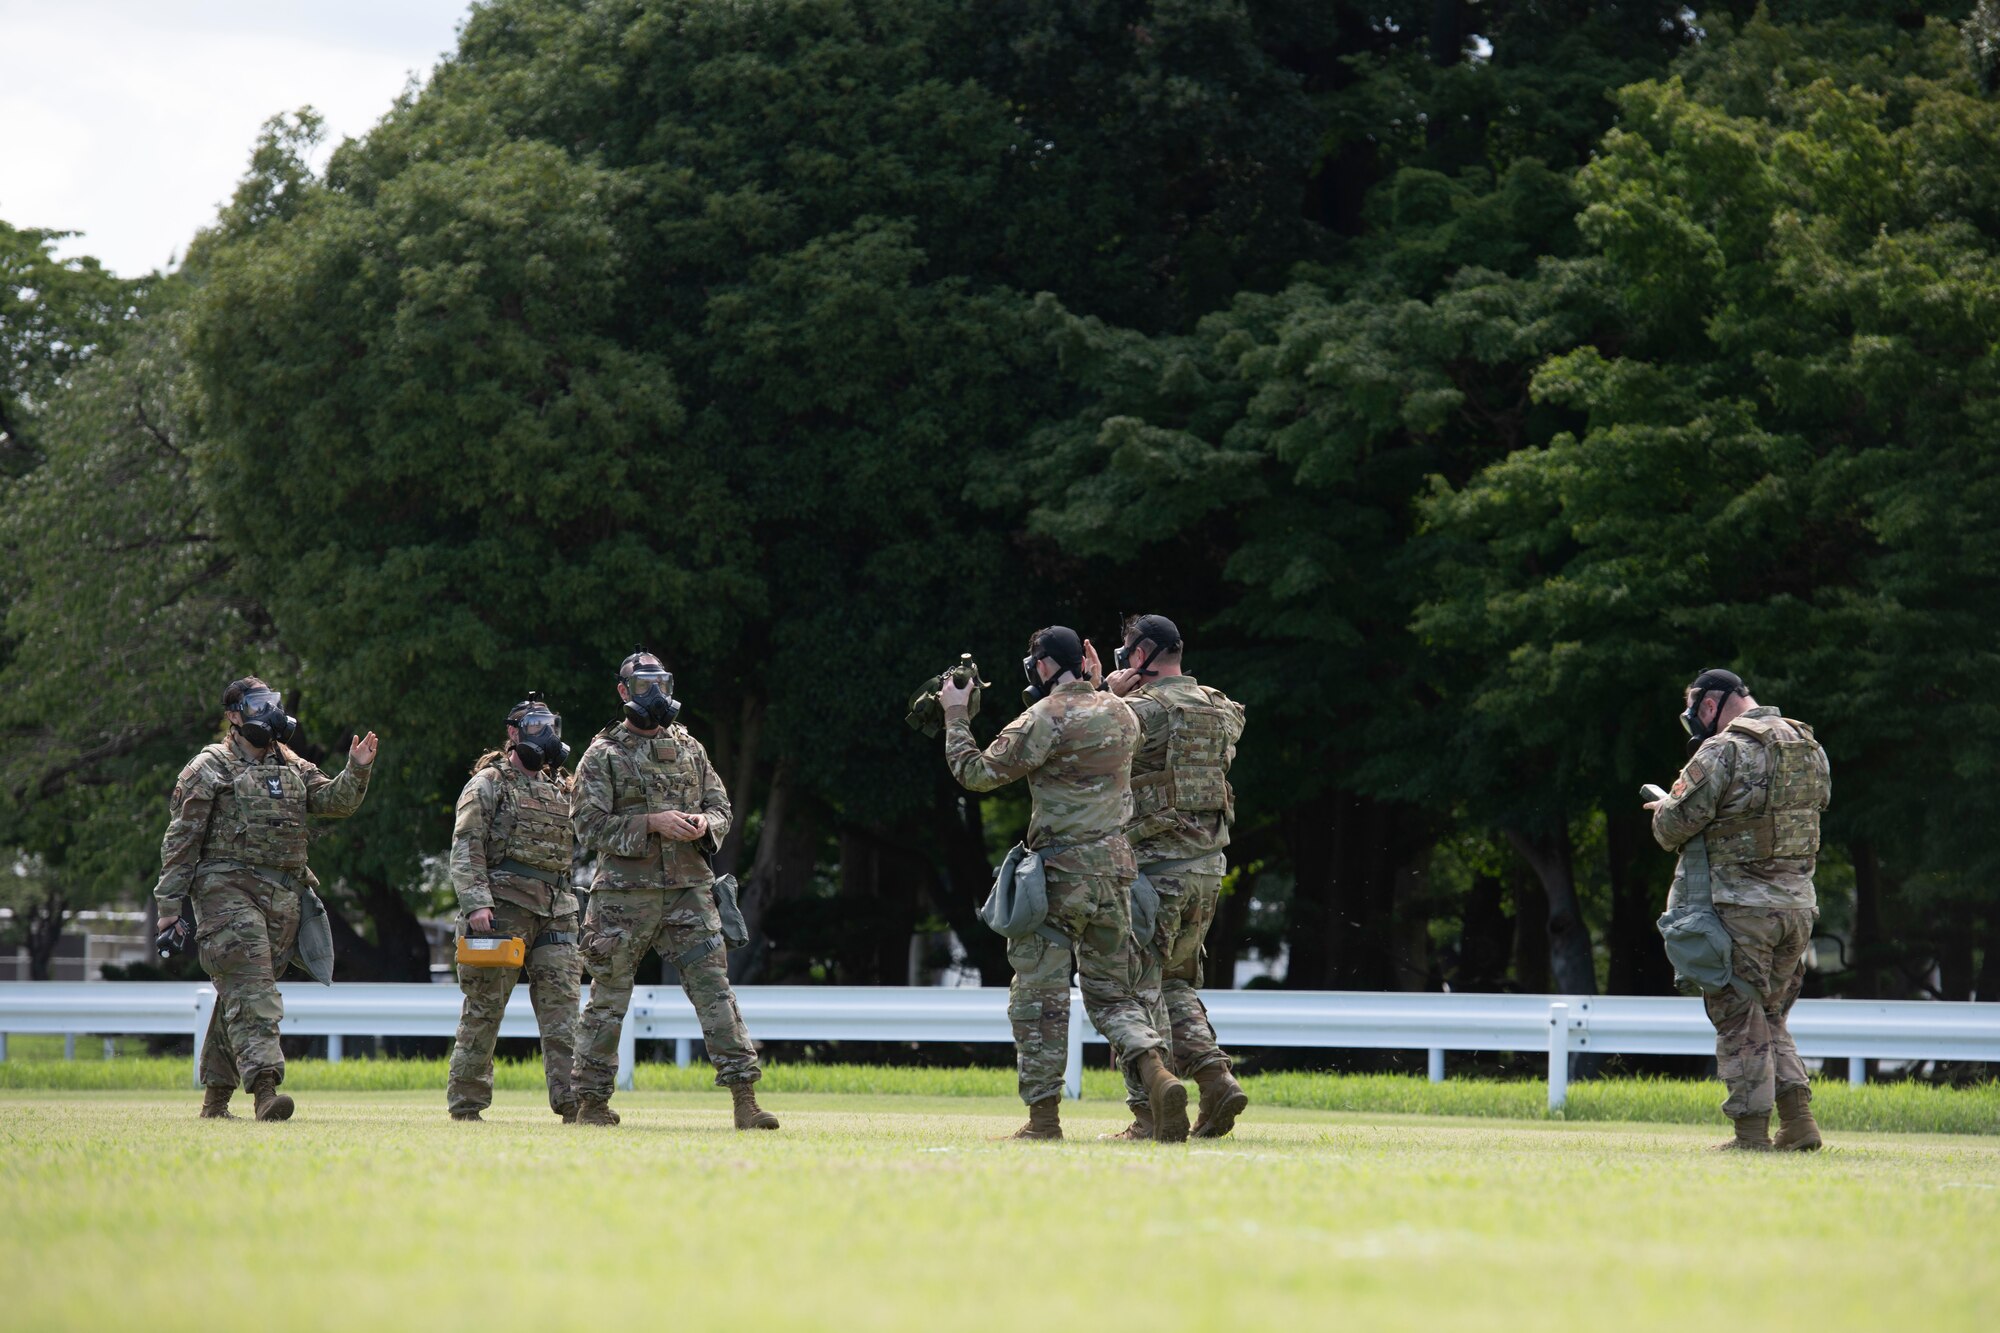 Members of the 374th Civil Engineer Squadron and 138th Civil Engineer Squadron from Tulsa Air National Guard Base, Oklahoma, rendezvous after perform a sweep of the area during a chemical, biological, radioactive and nuclear site survey training at the Sagami General Depot, Japan. This training allowed for the ANG to integrate with overseas active-duty members similar to what could be expected during a real-world deployment.  (U.S. Air Force photo by Tech. Sgt. Joshua Edwards)